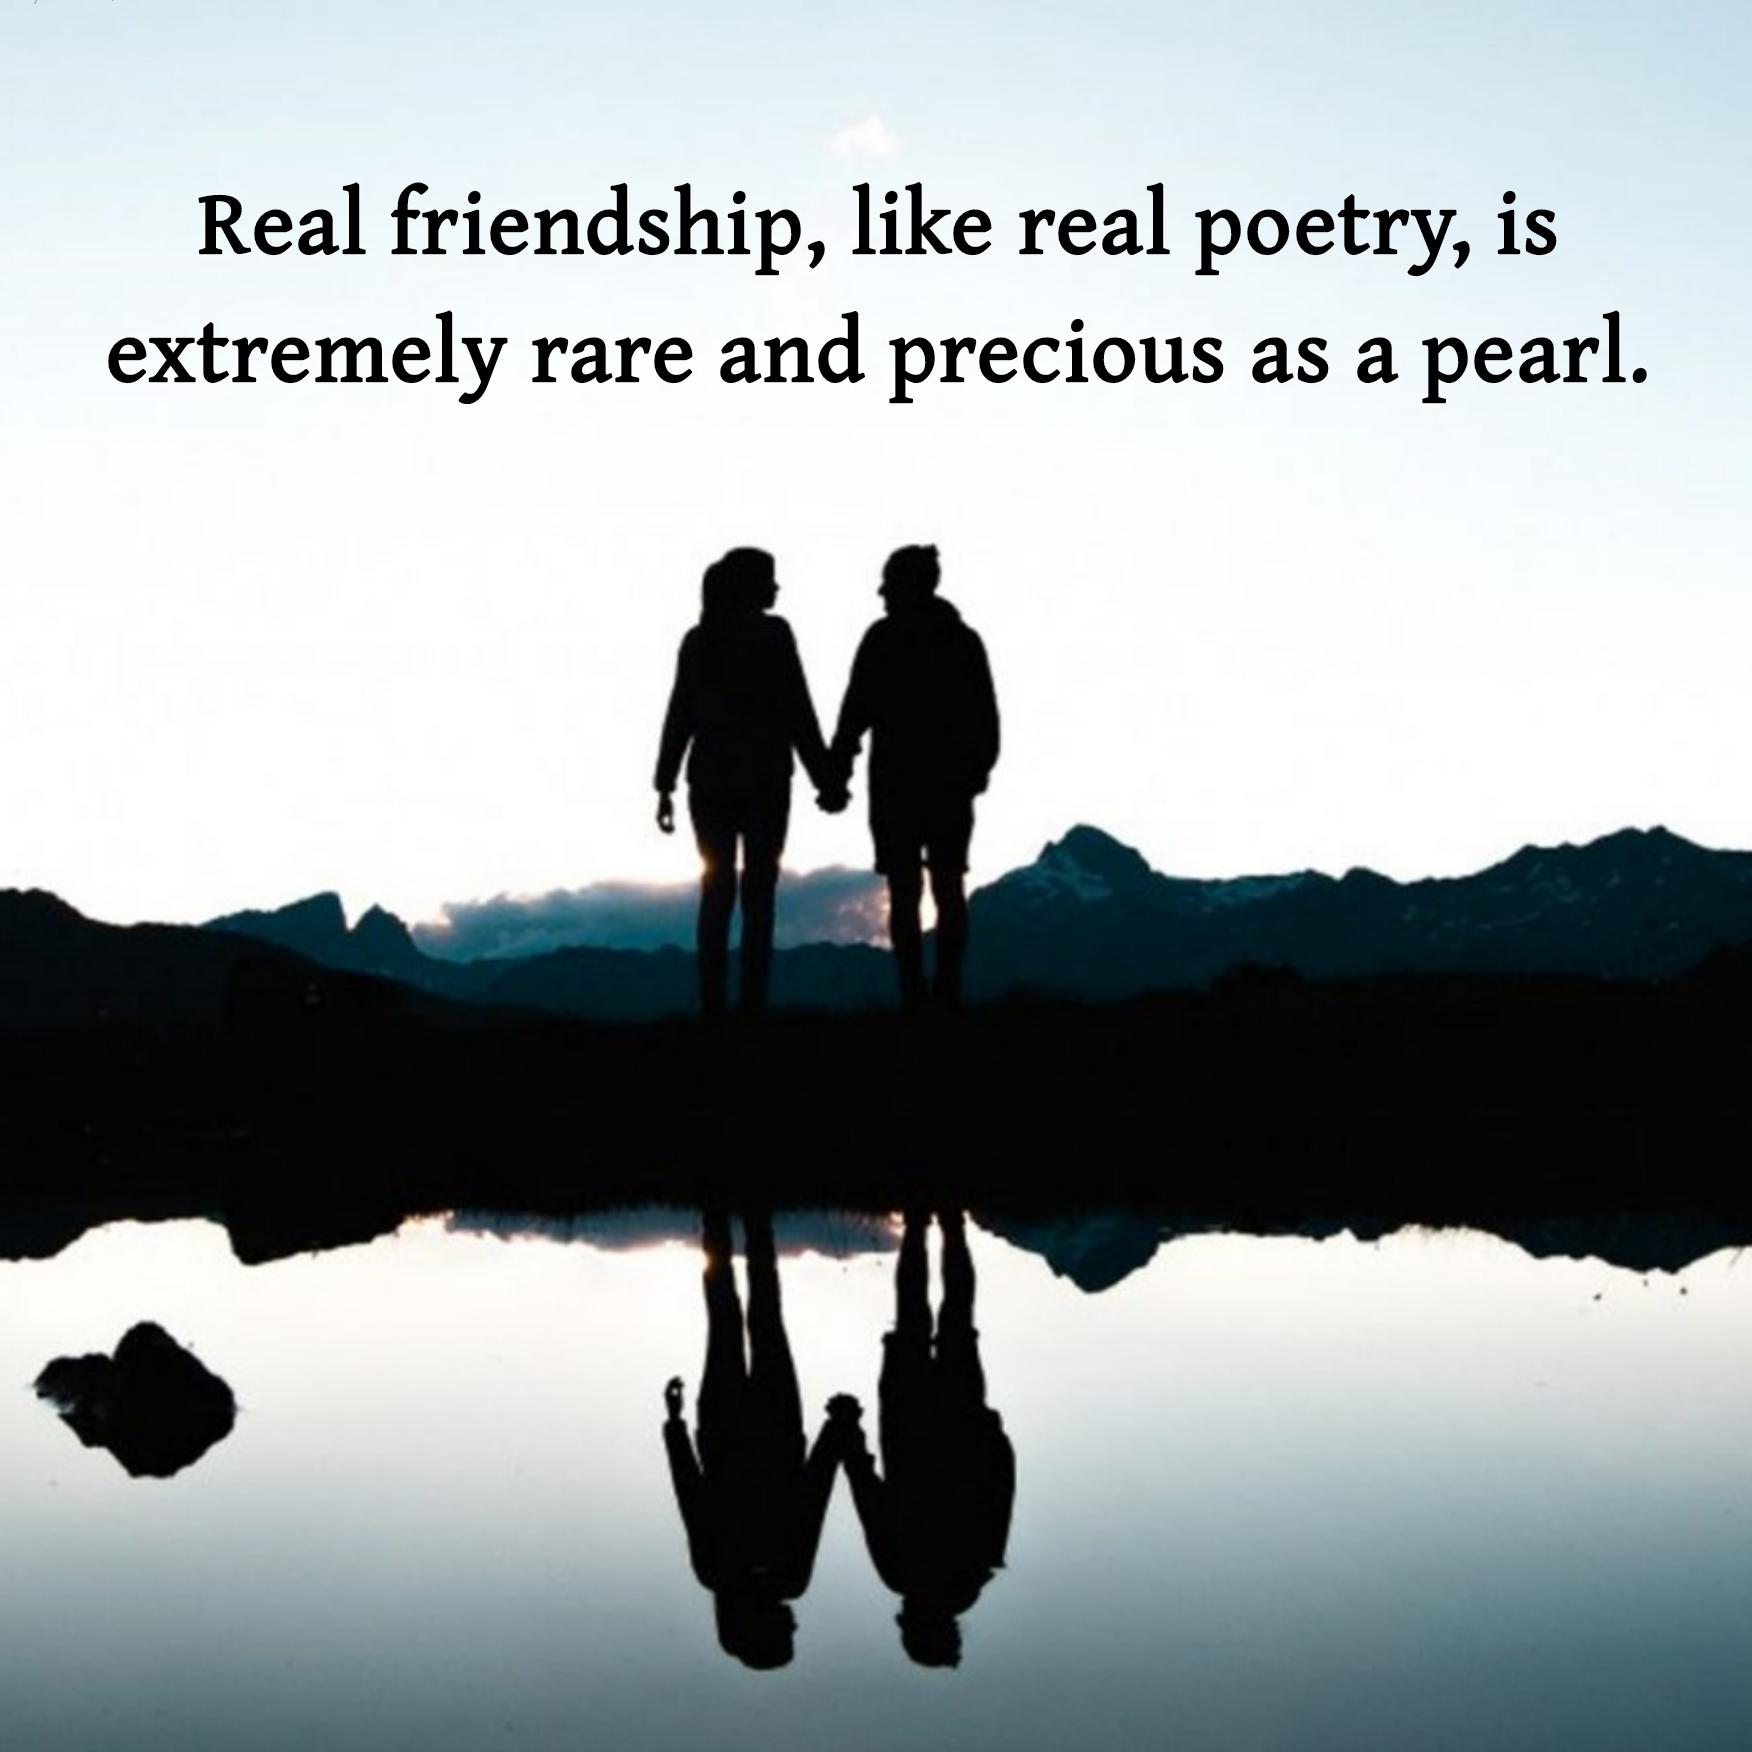 Real friendship like real poetry is extremely rare